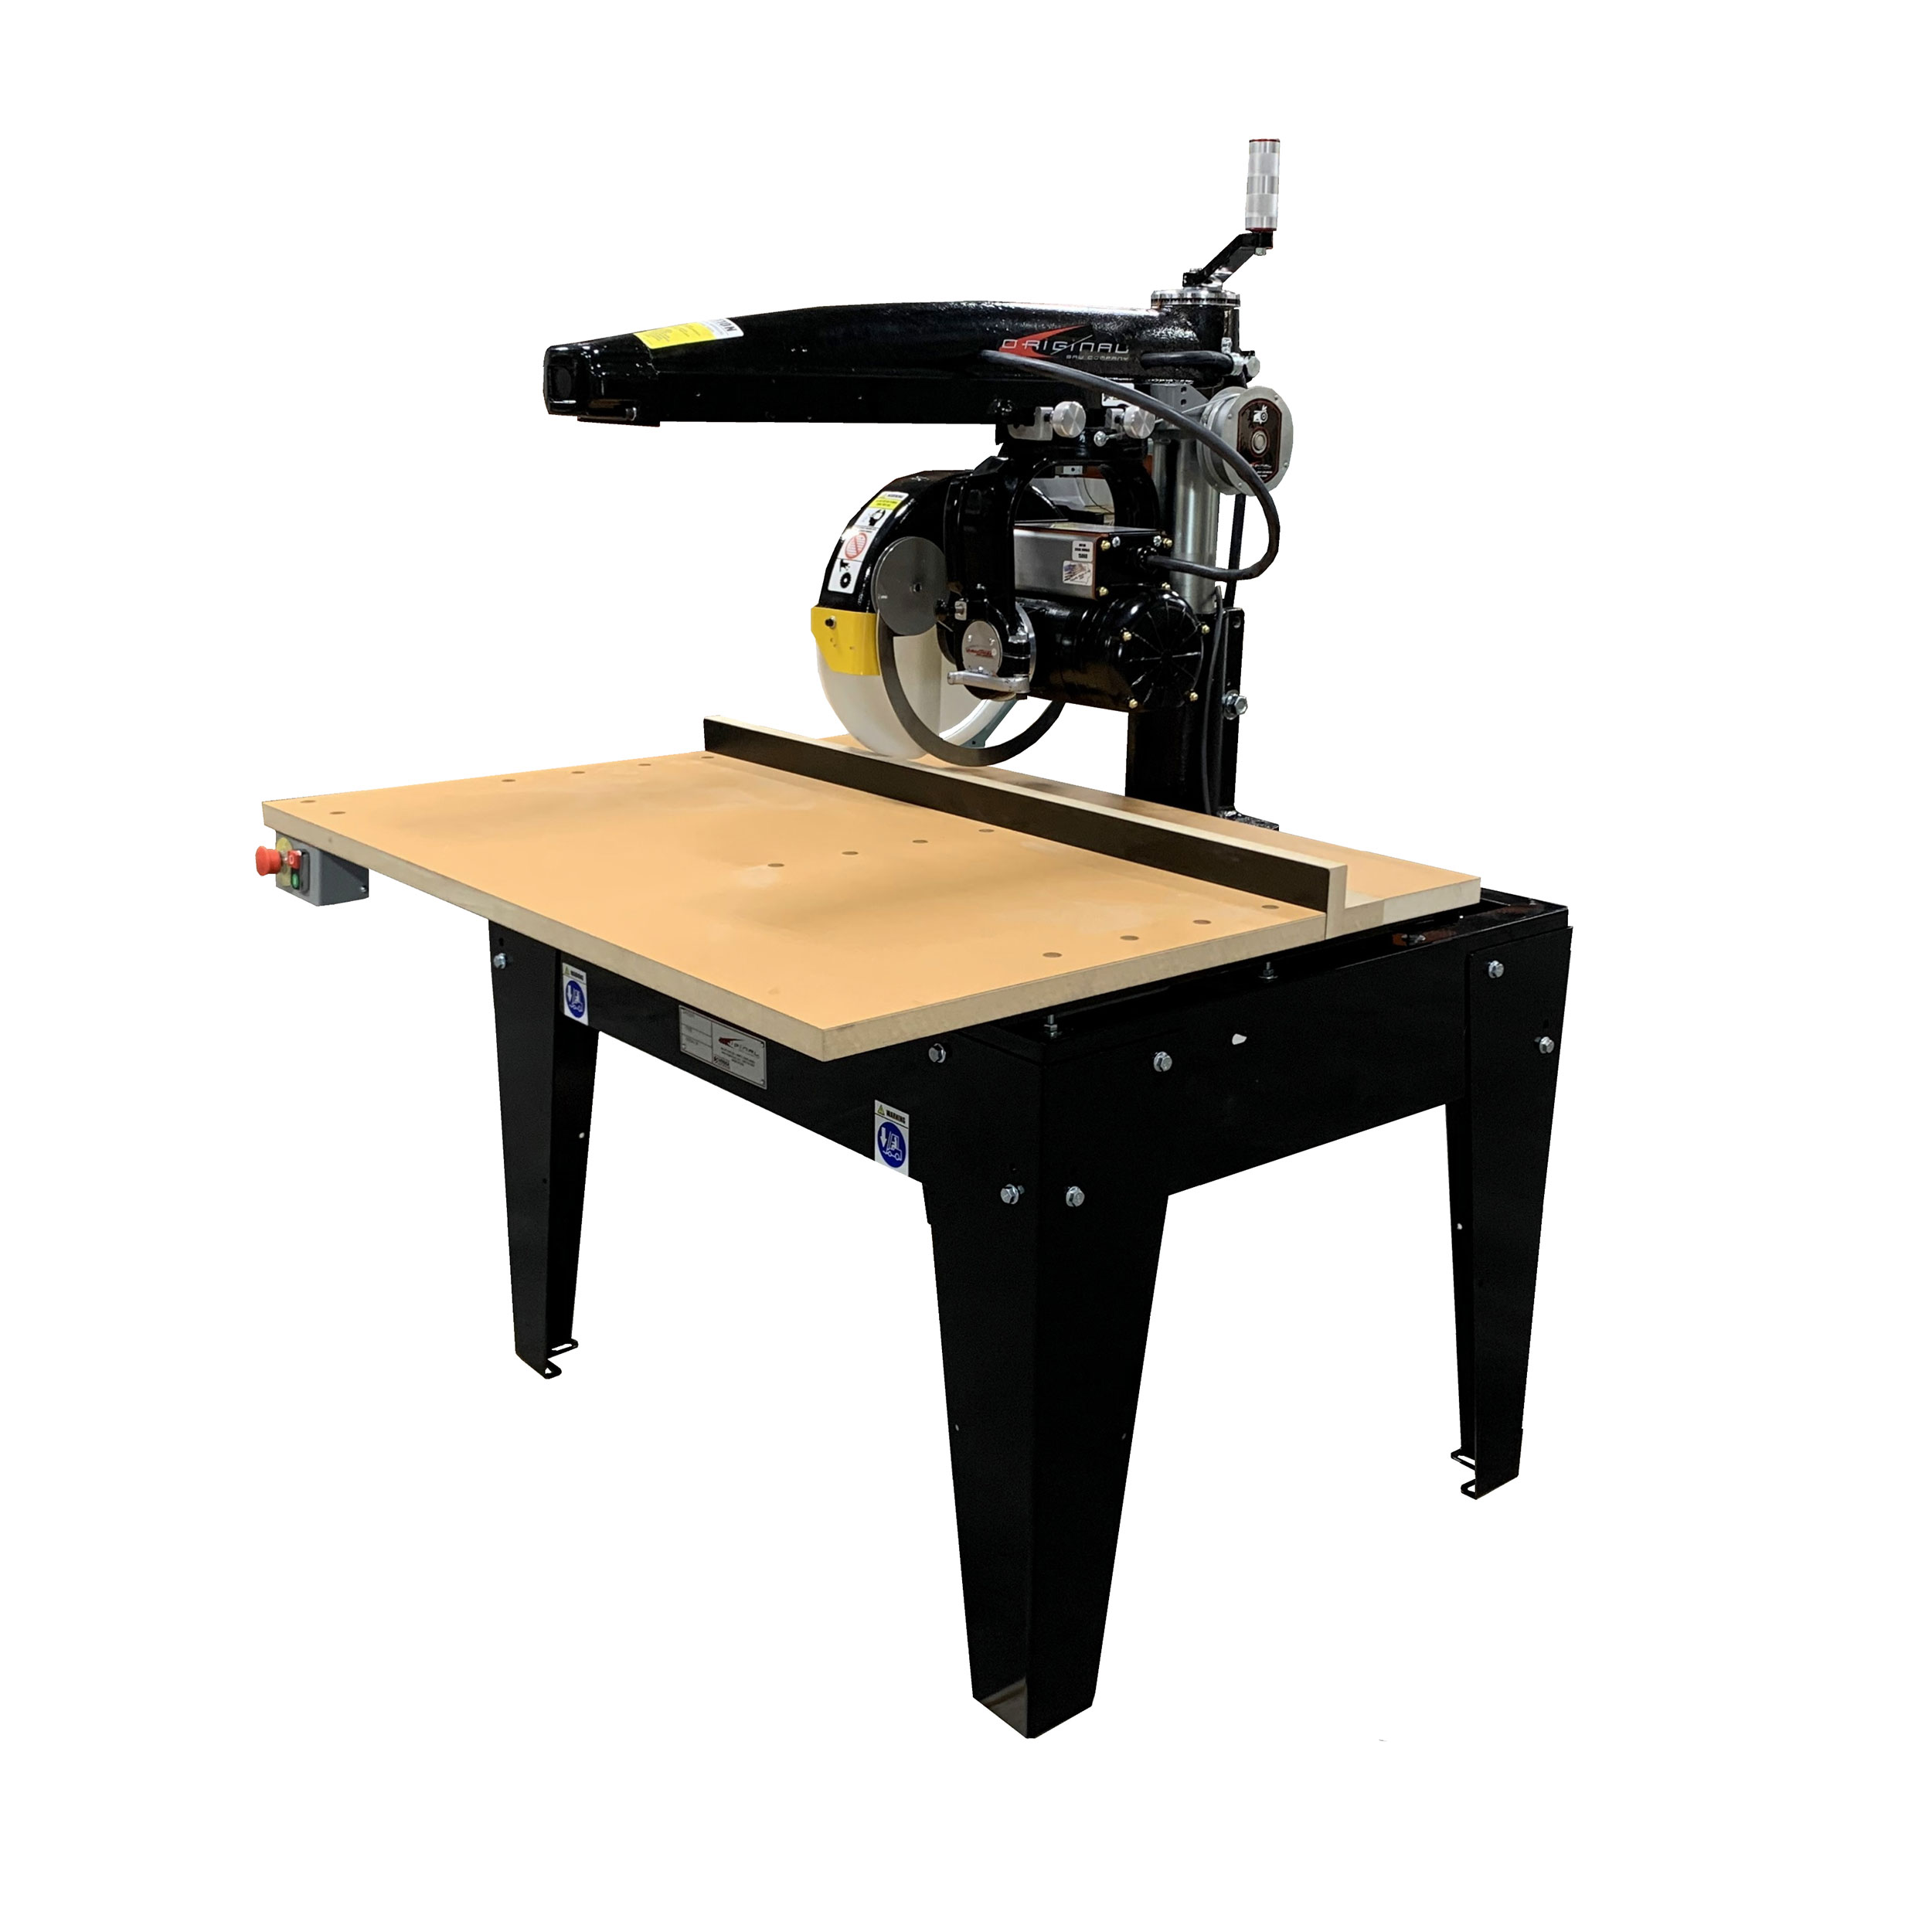 Radial Arm Saw With 14" Blade And 16" Crosscut, 5hp 3 Phase 460v